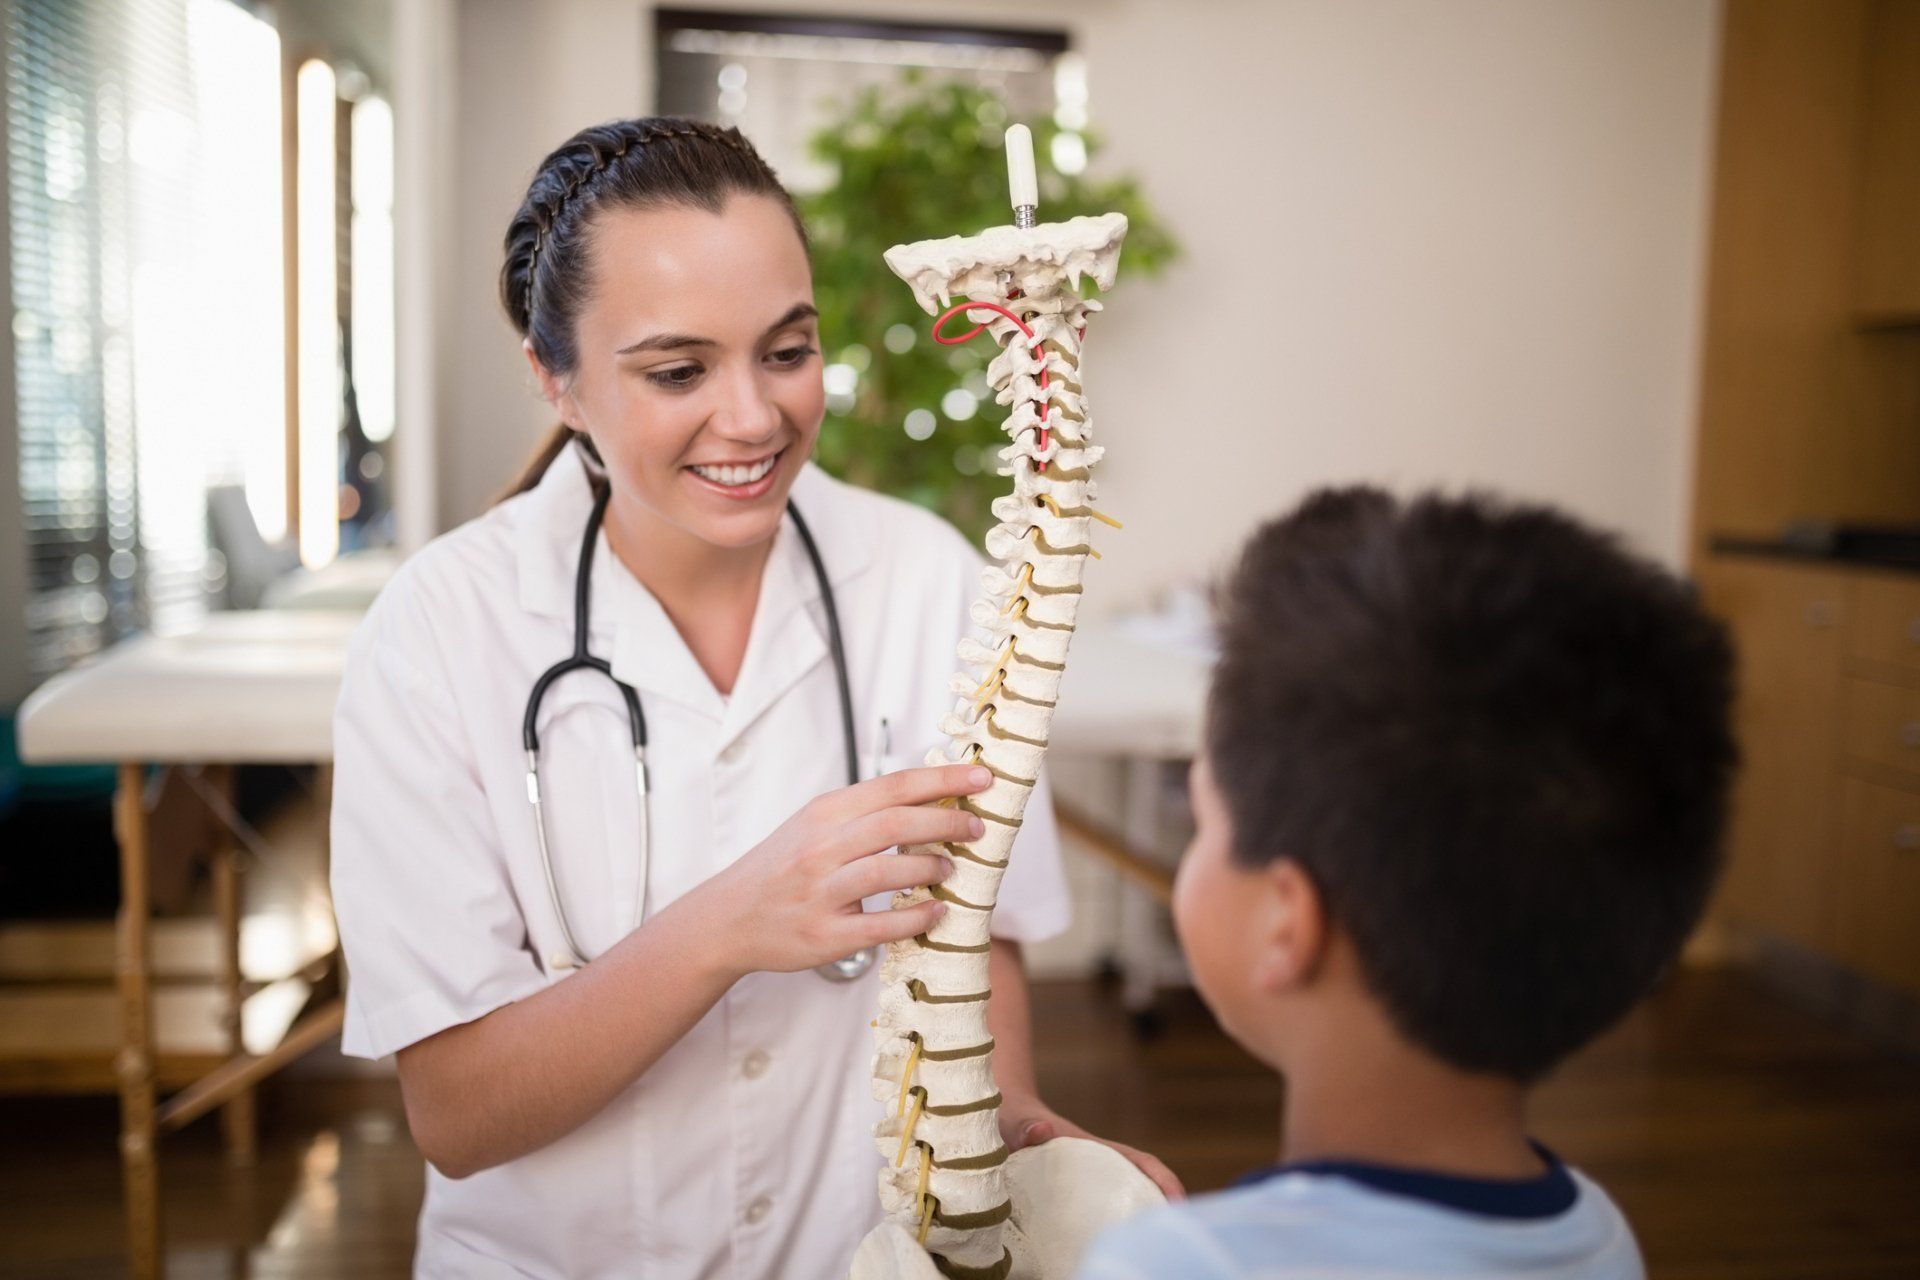 Chiropractor and child holding a spine model | Colorado Springs, CO | The Partridge Family Practice